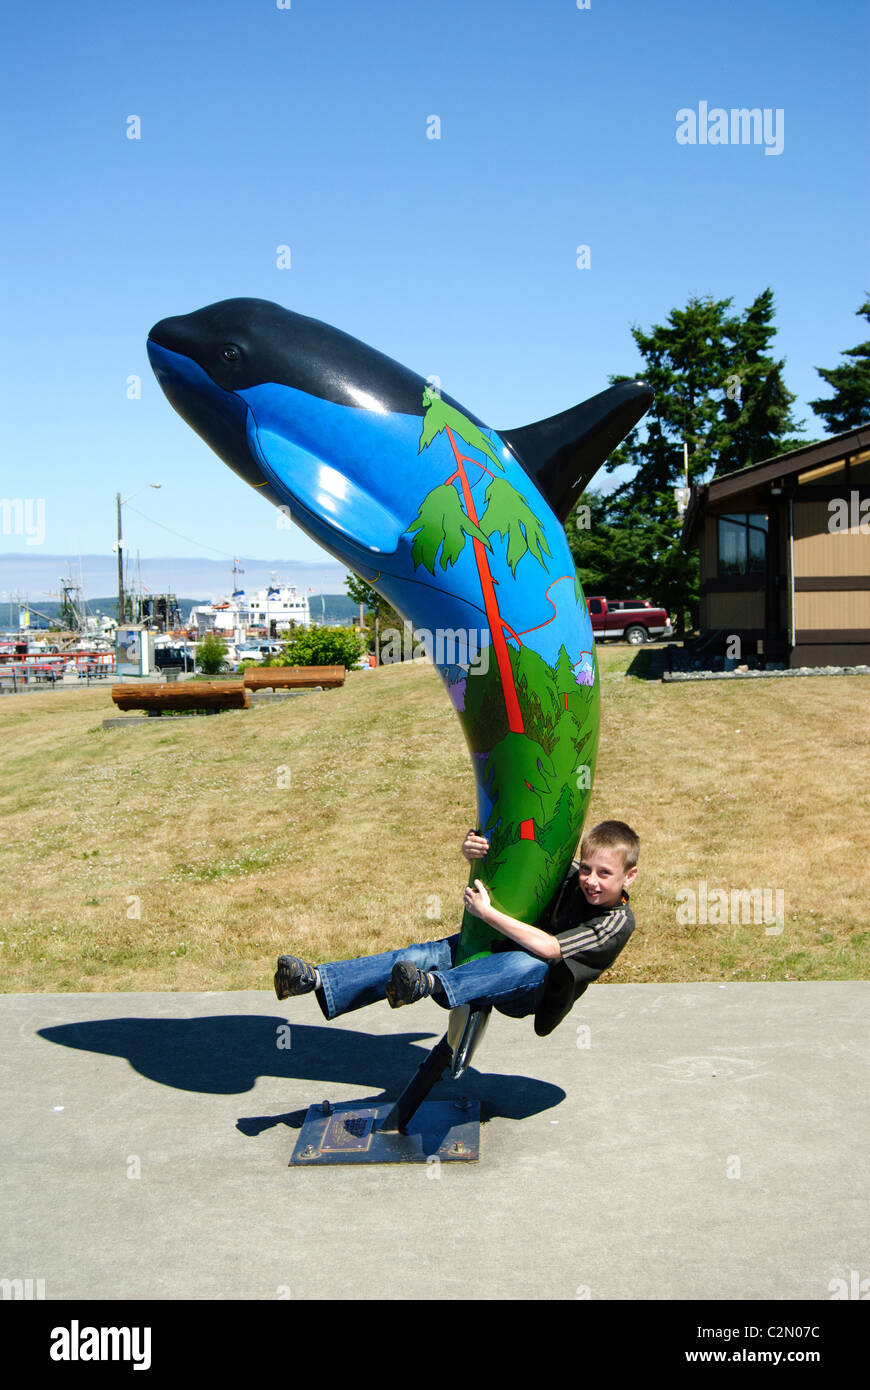 Boy playing on orca (killer whale) statue, Port McNeill, Vancouver Island, British Columbia, Canada Stock Photo